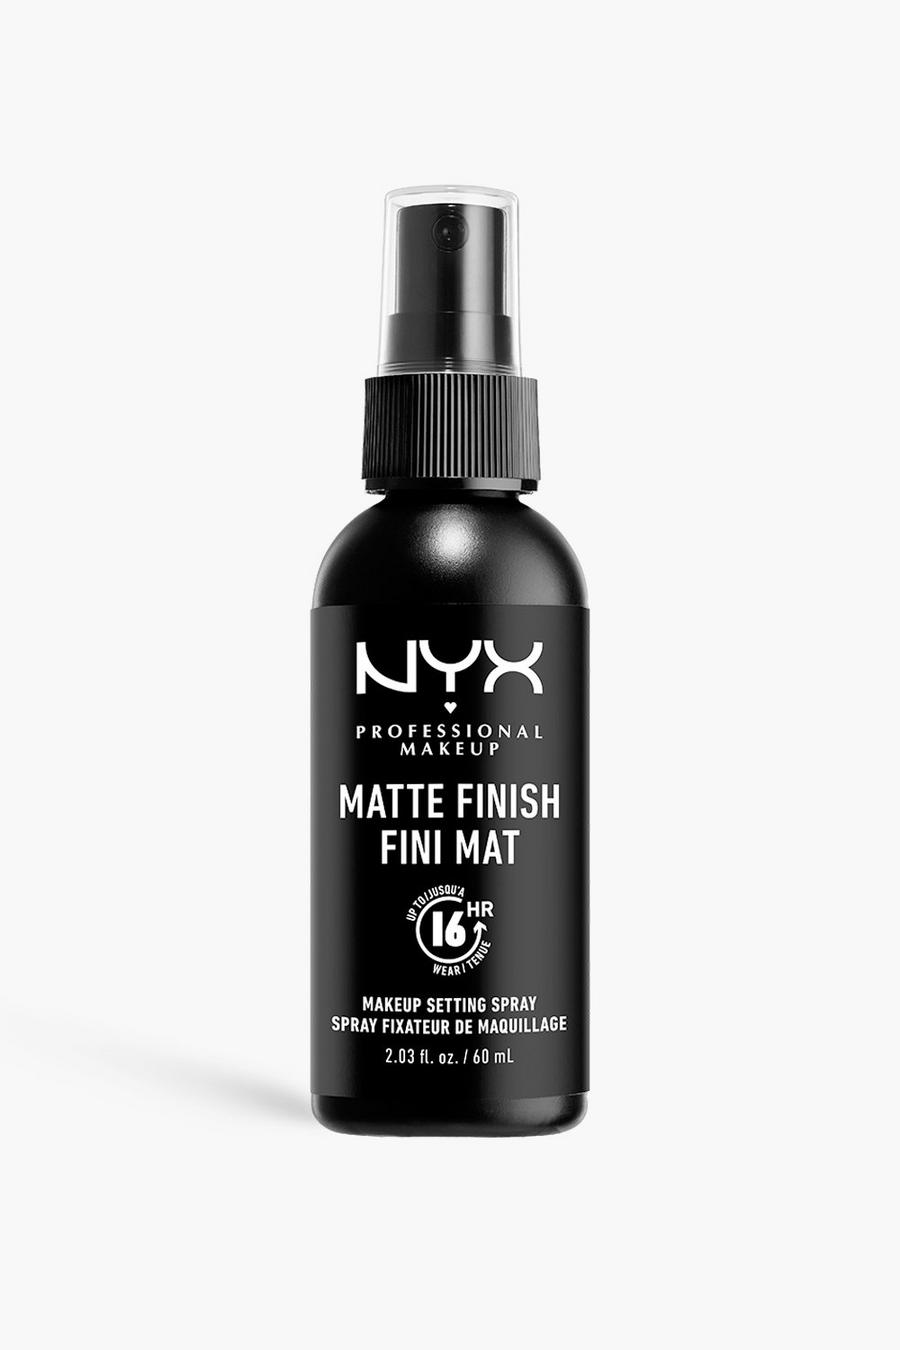 Clear clair NYX Professional Makeup Makeup Setting Spray - Matte Long-lasting Shine Free Finish